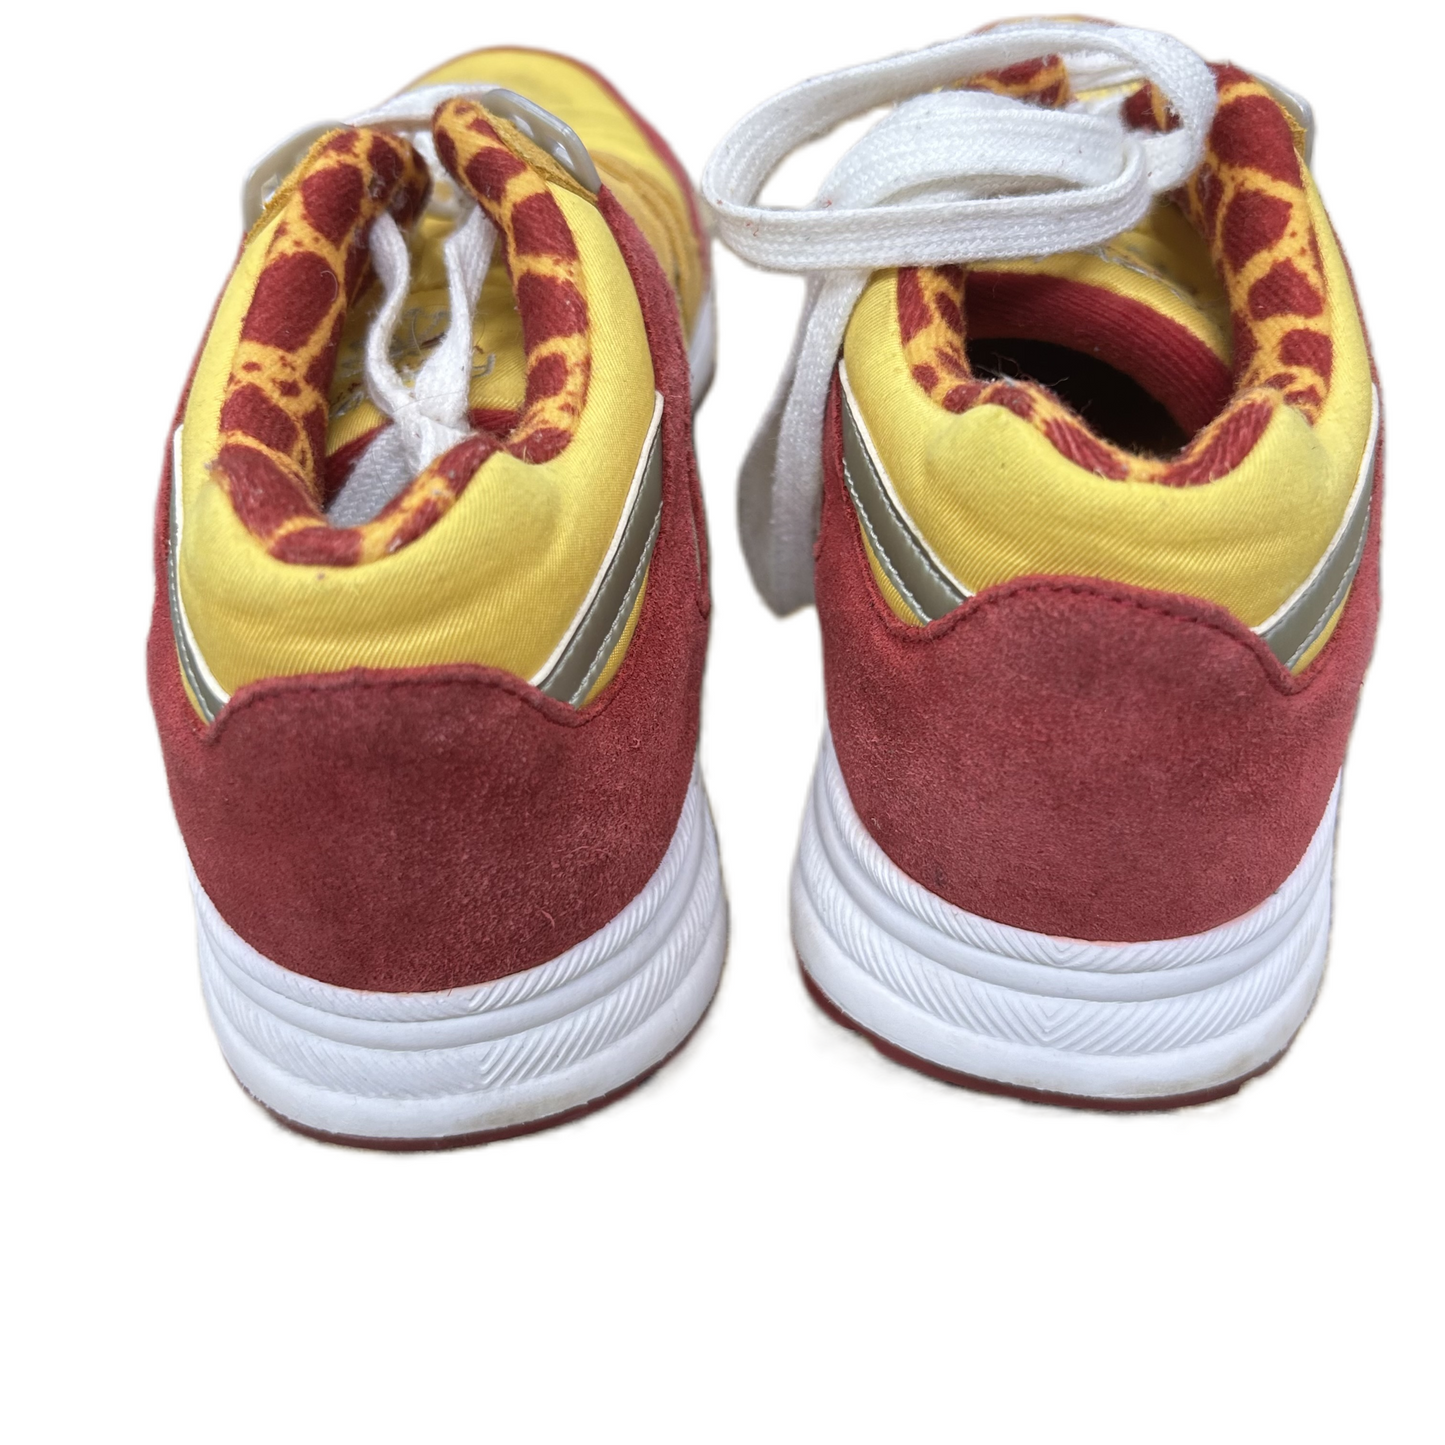 Red & Yellow Shoes Sneakers By Reebok, Size: 7